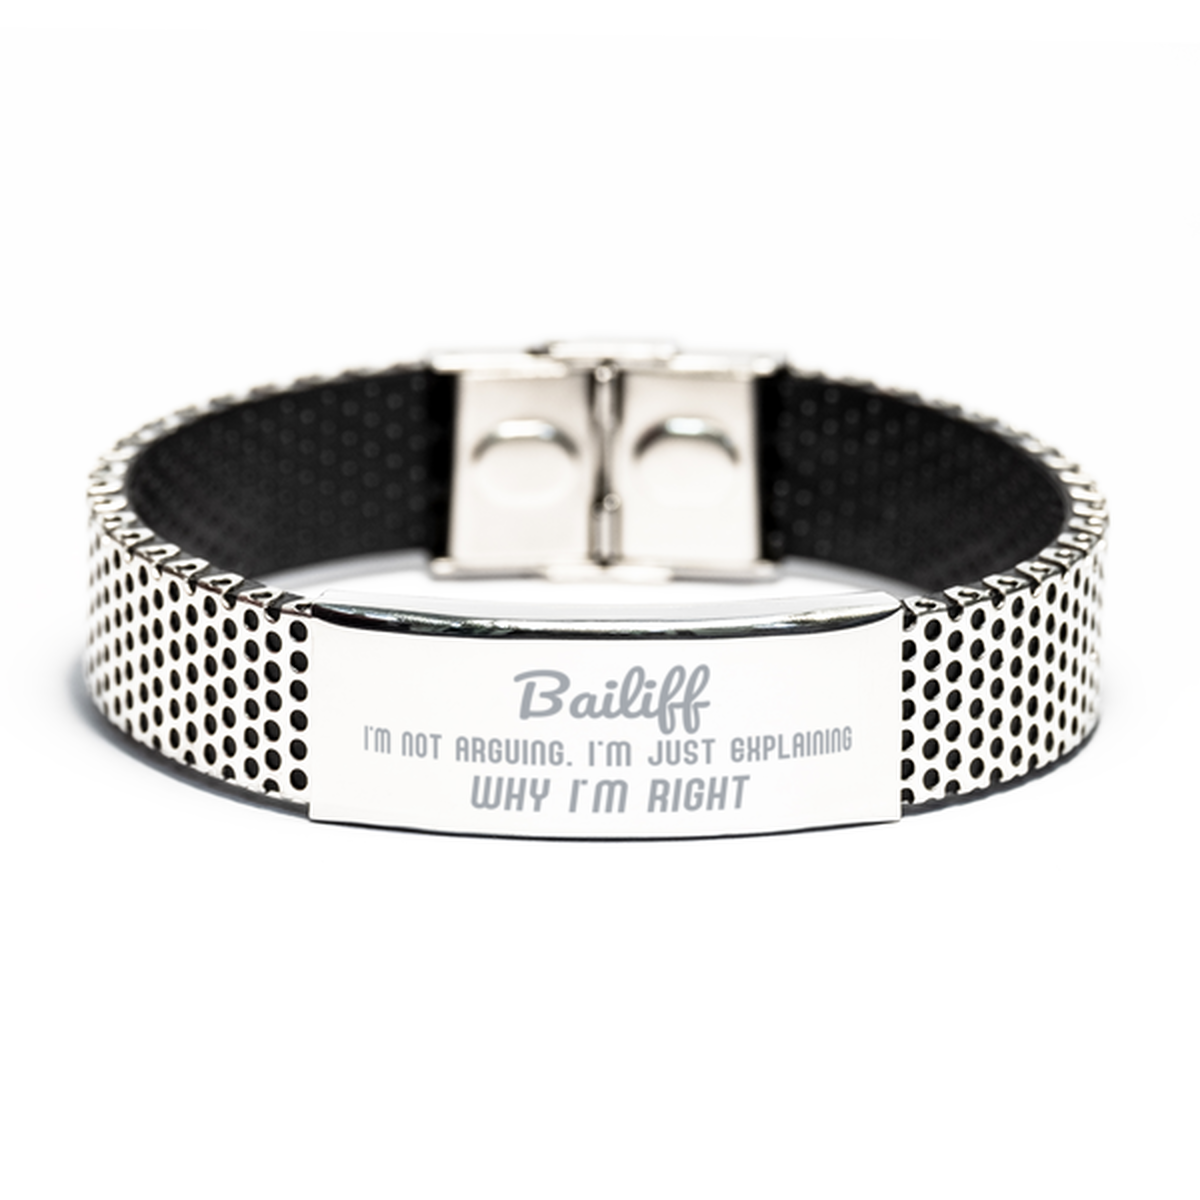 Bailiff I'm not Arguing. I'm Just Explaining Why I'm RIGHT Stainless Steel Bracelet, Funny Saying Quote Bailiff Gifts For Bailiff Graduation Birthday Christmas Gifts for Men Women Coworker